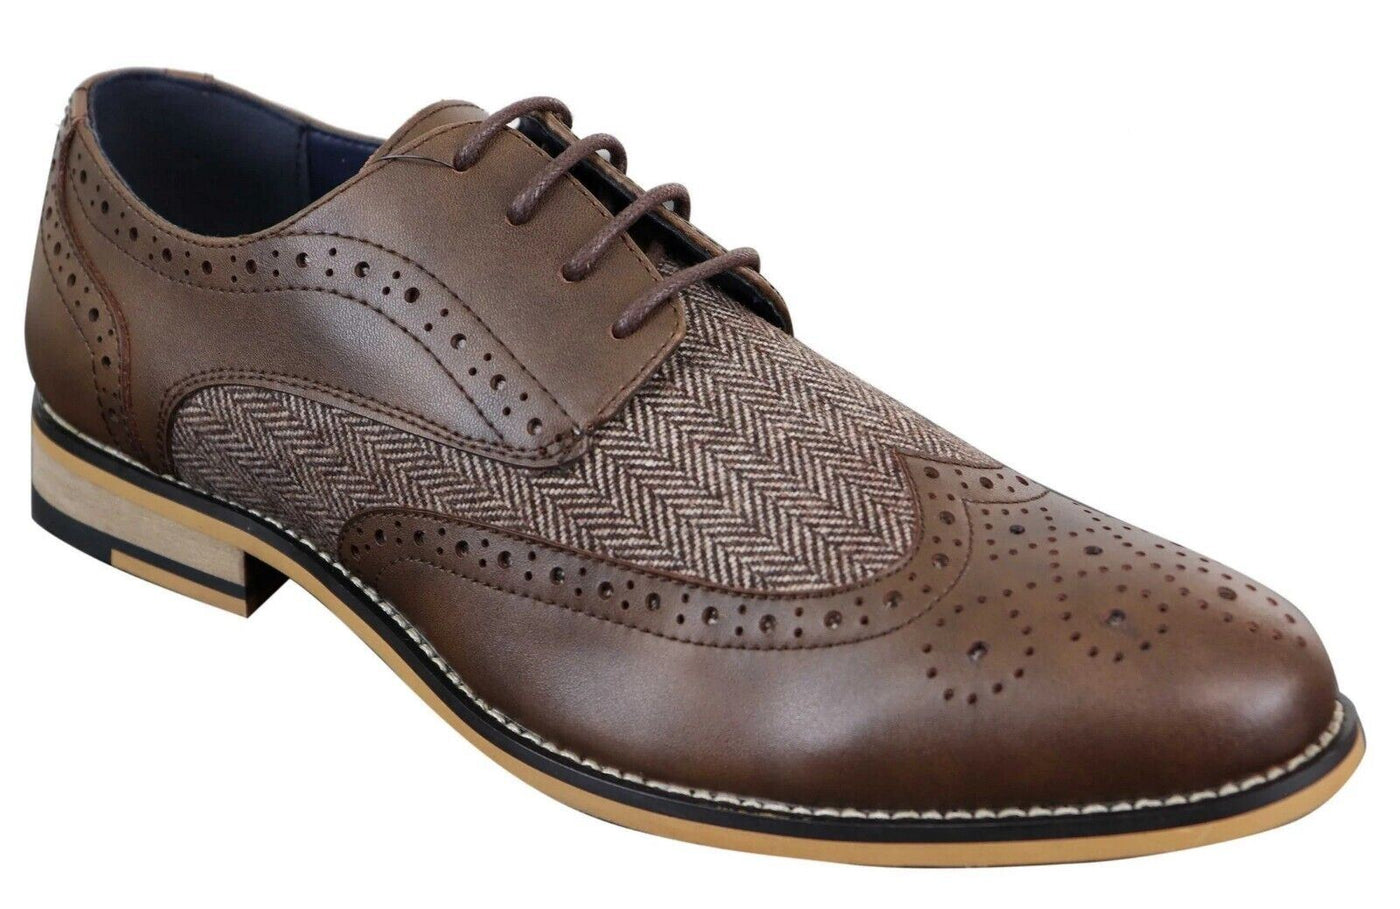 Mens Classic Oxford Tweed Brogue Shoes in Brown Leather